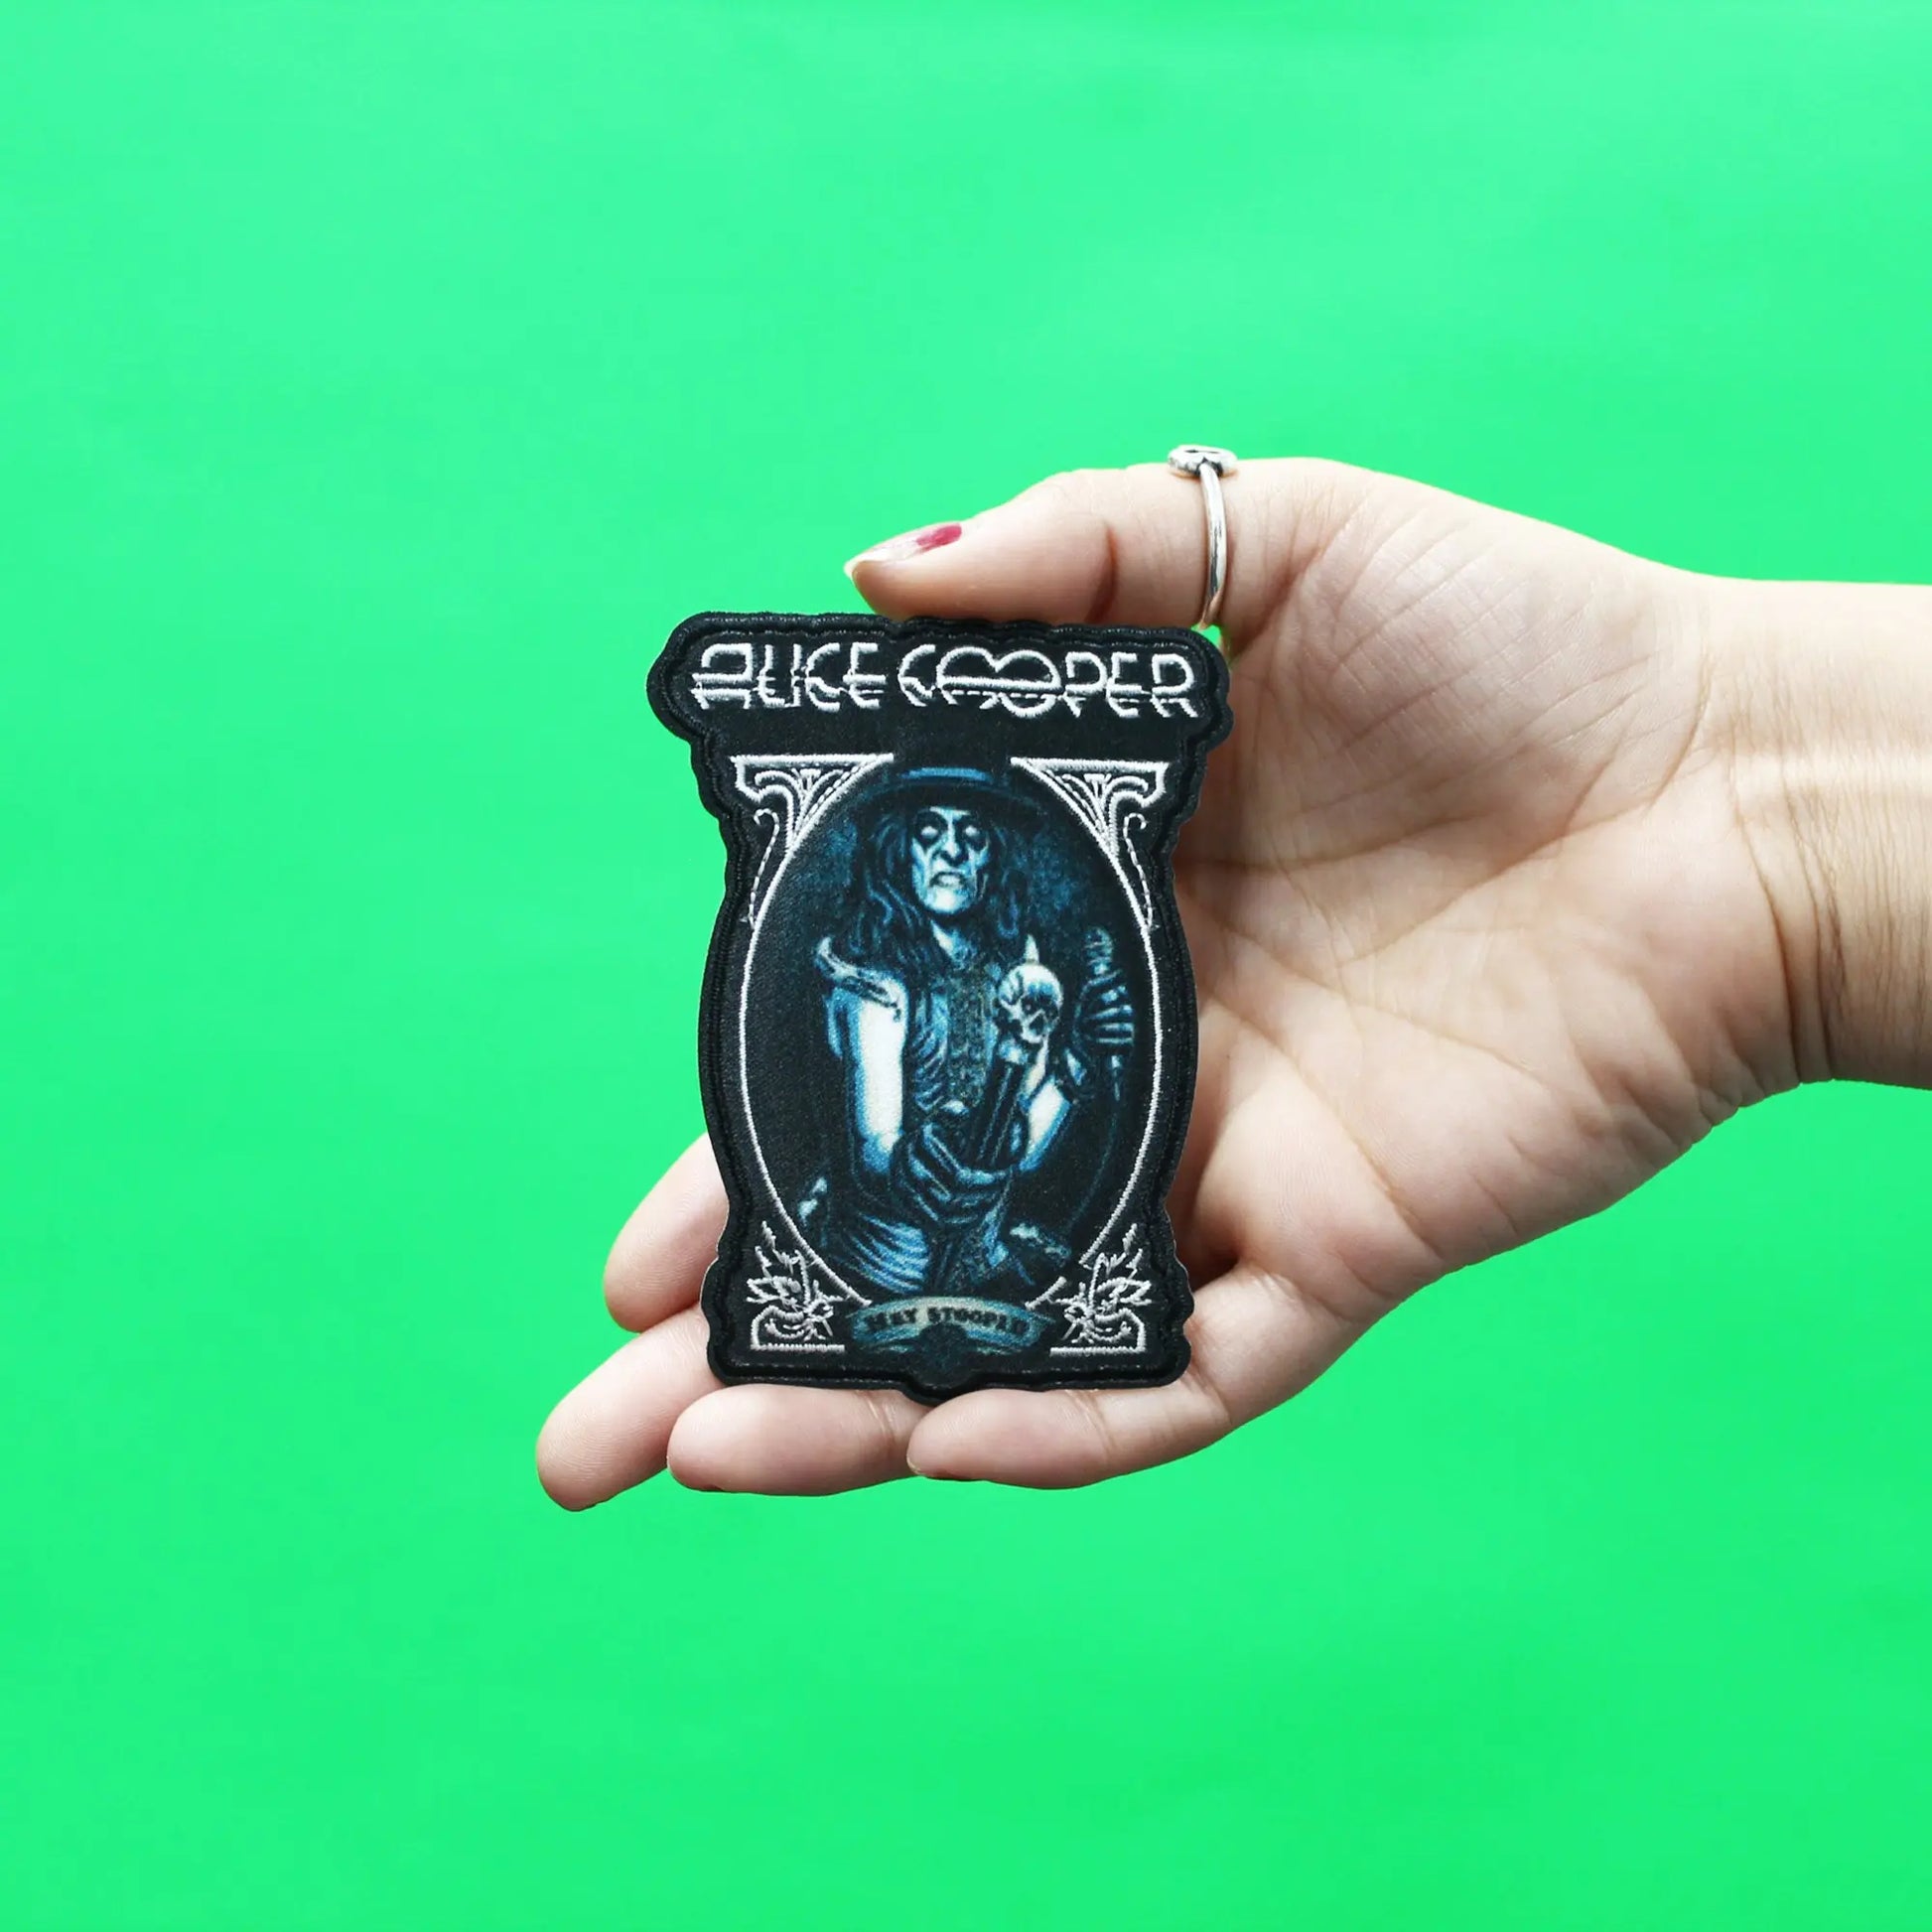 Alice Cooper Patch Hey Stoopid Embroidered Iron On 